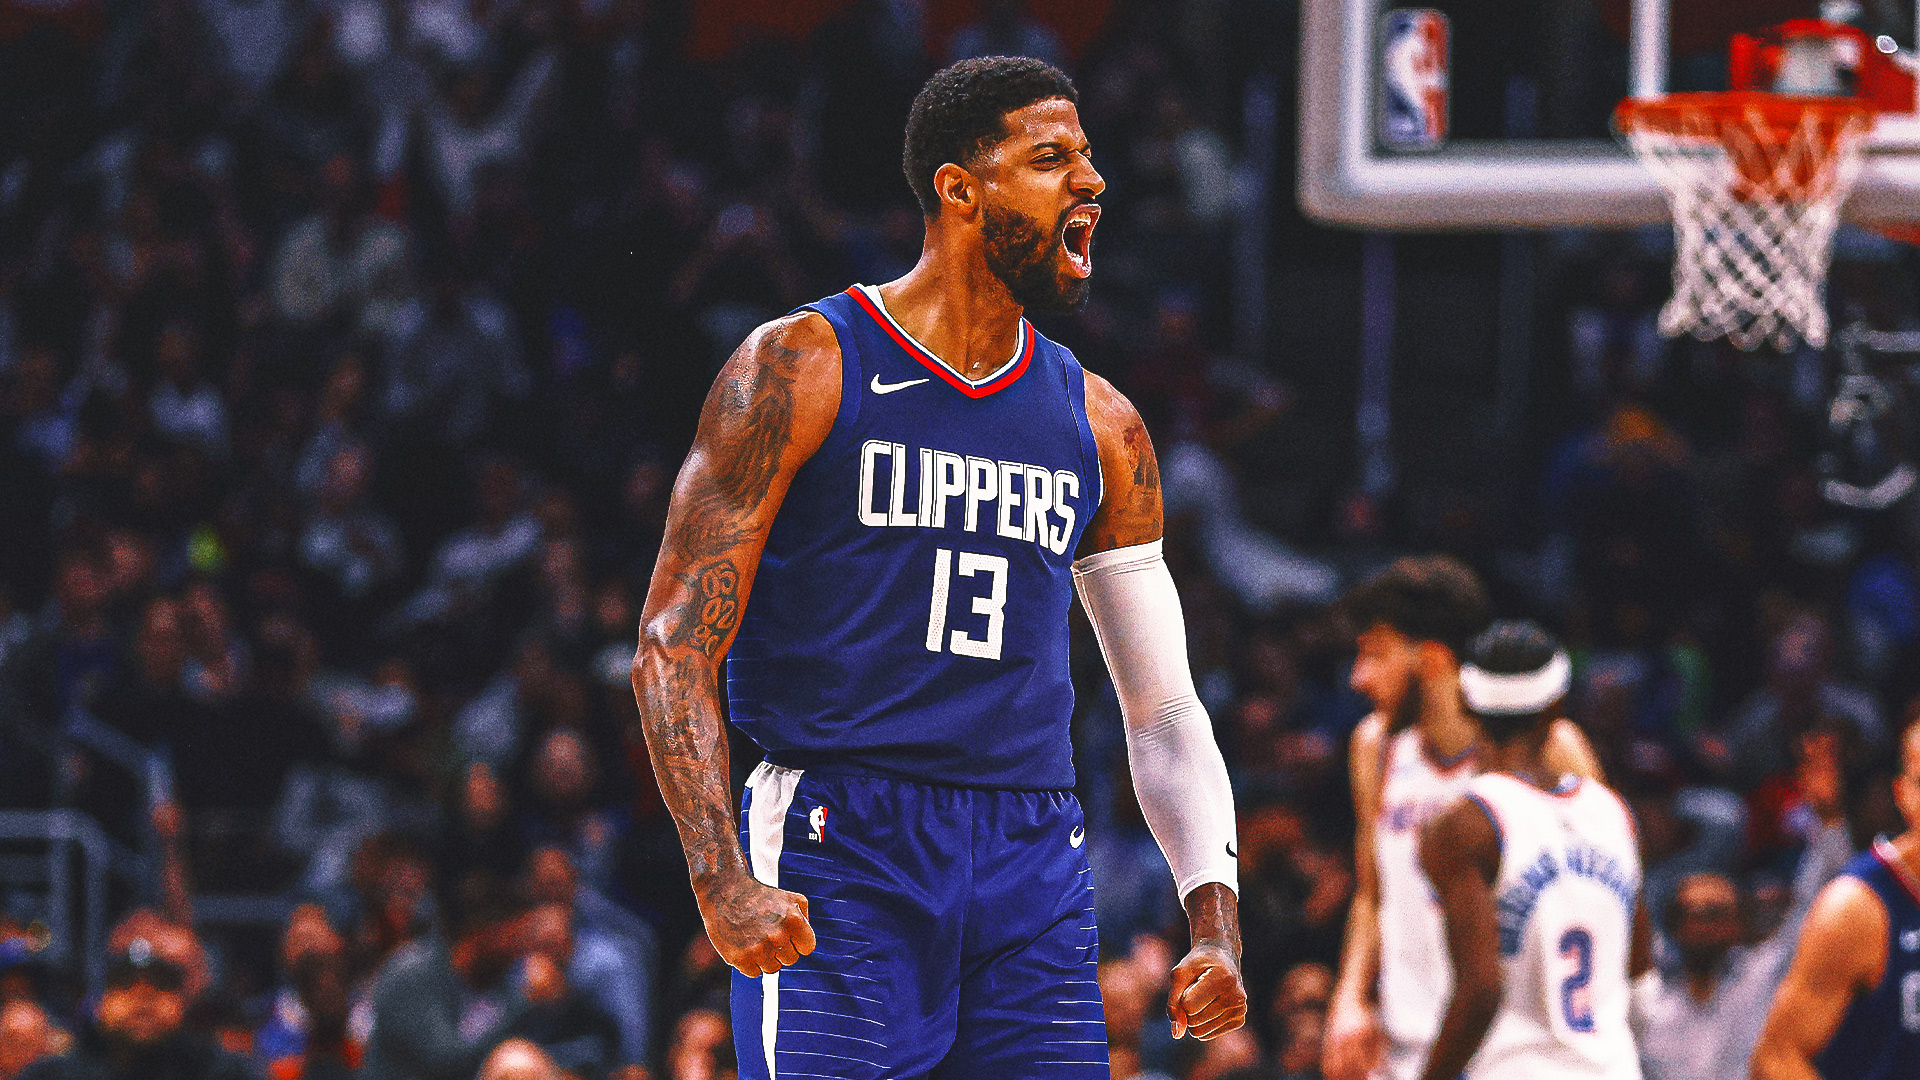 Paul George scores season-high 38 points to lead Clippers over Thunder 128-117 for 9th win in 11 games